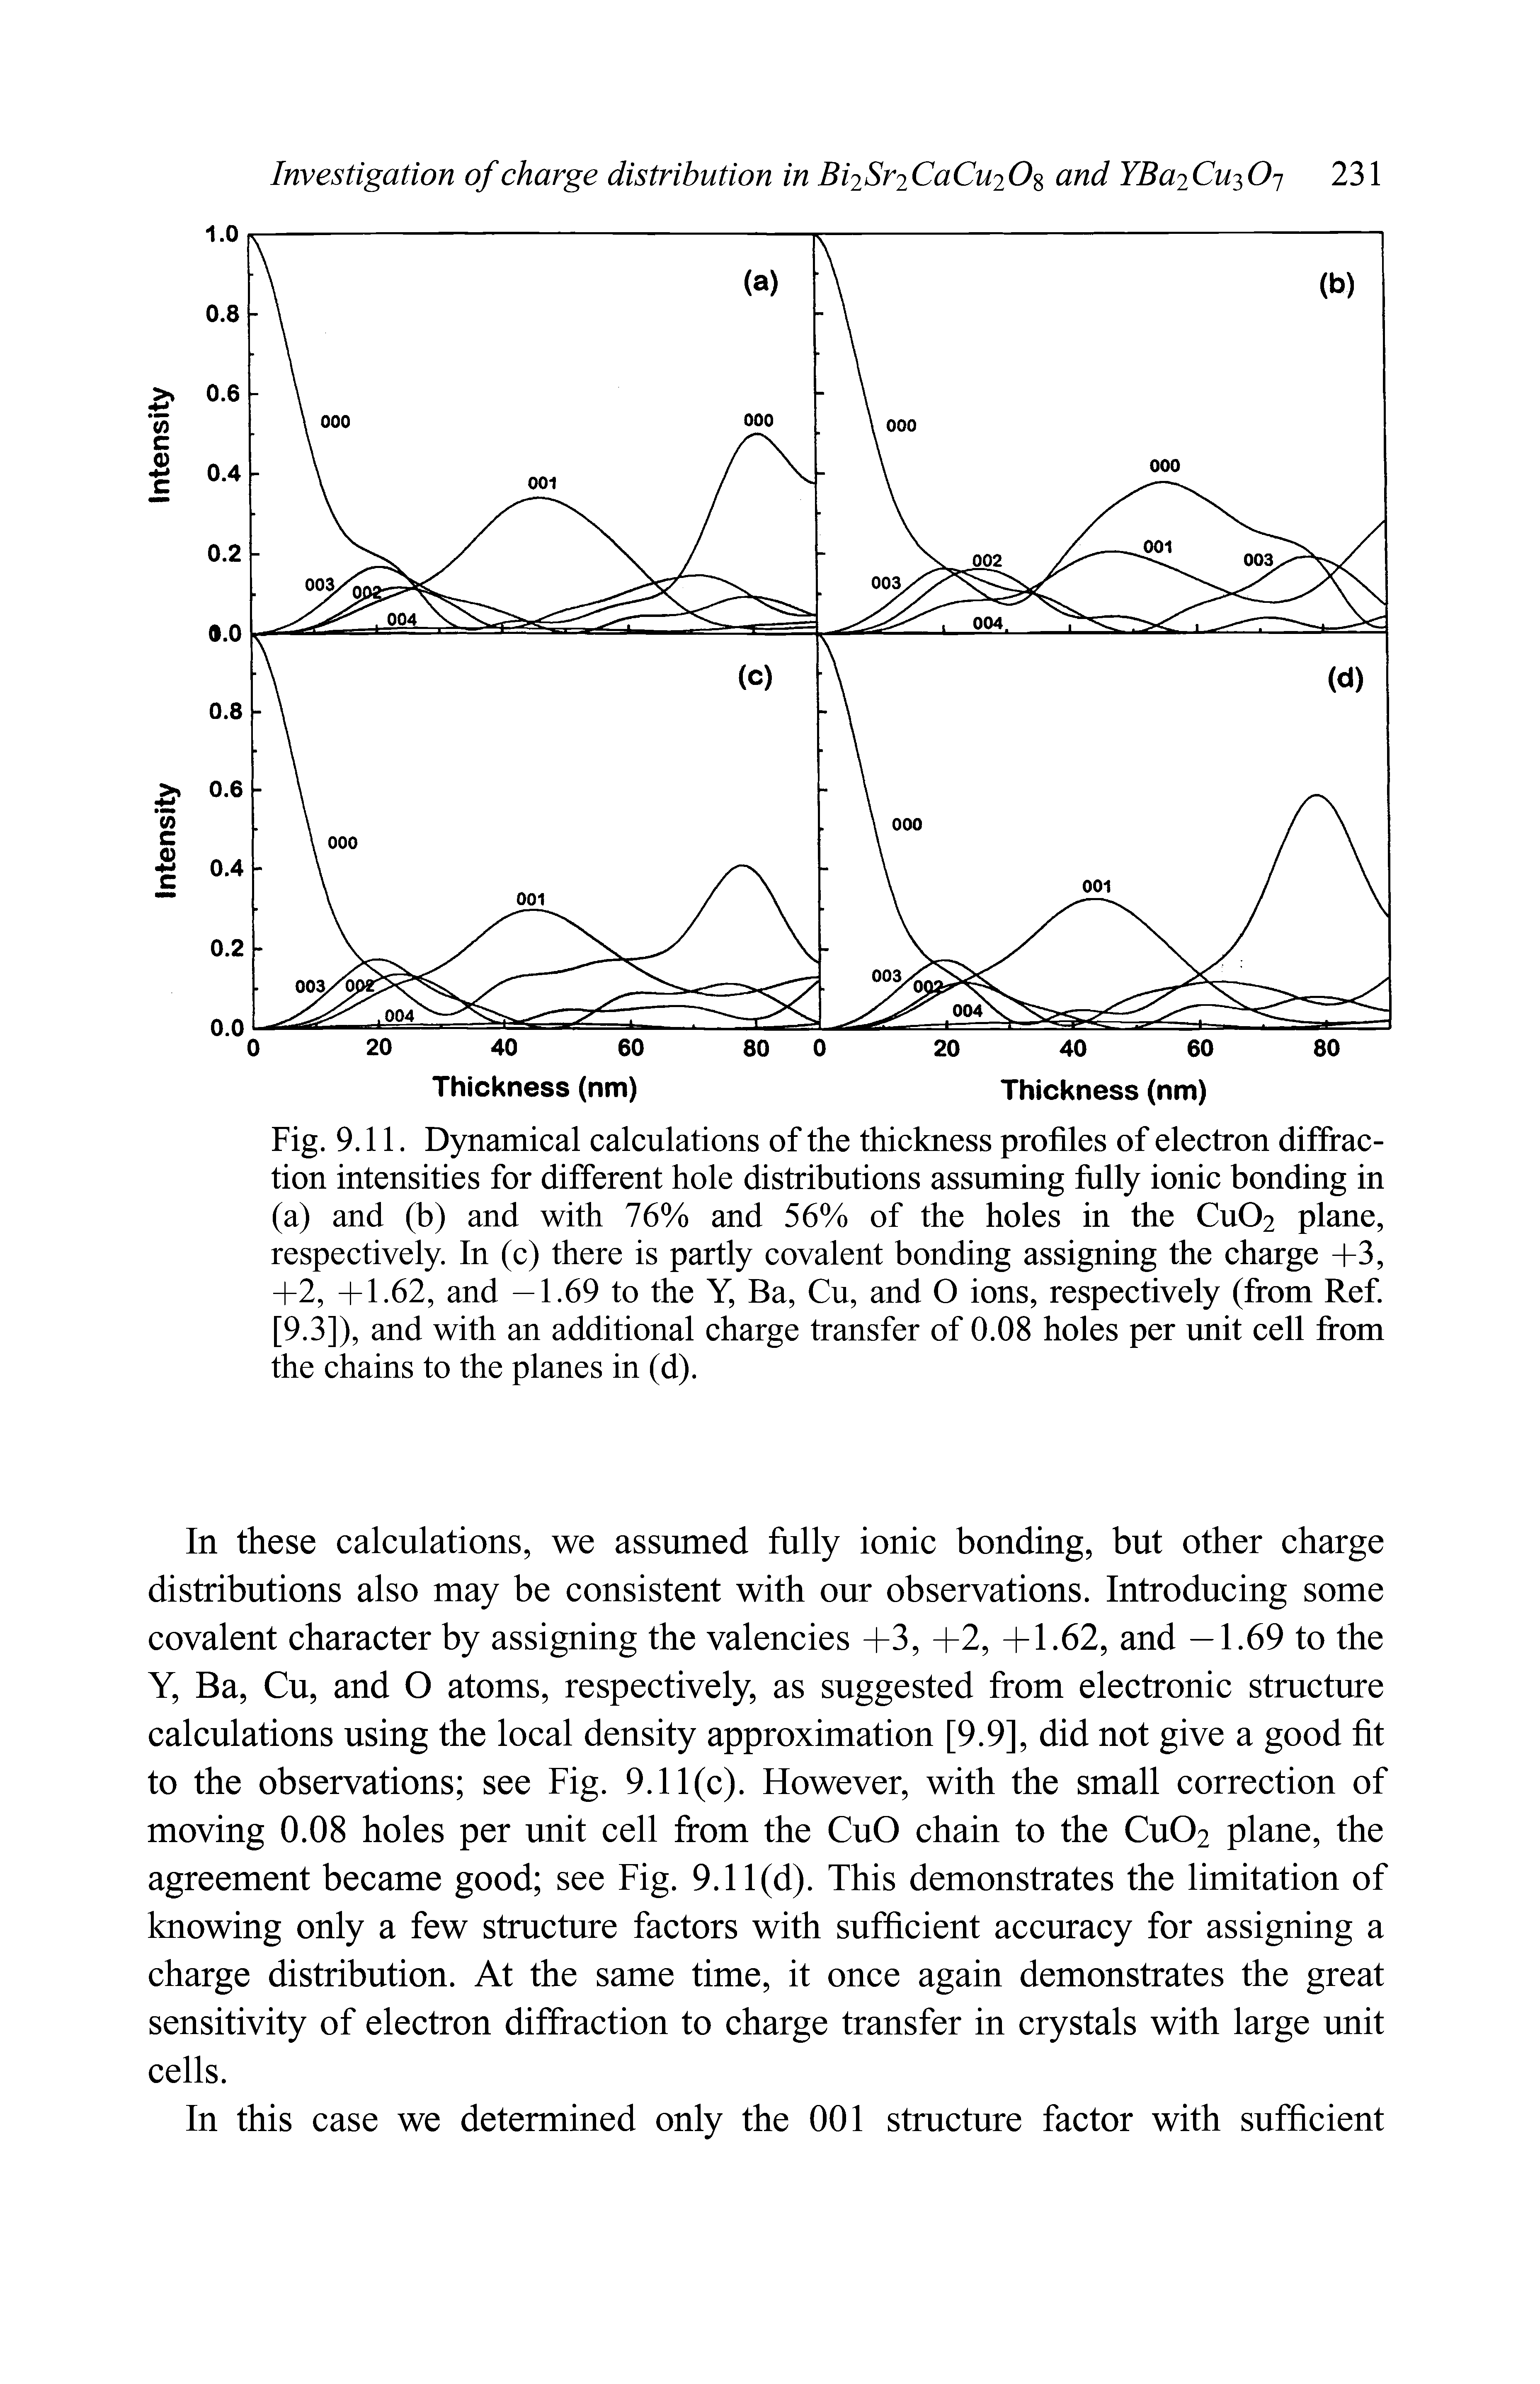 Fig. 9.11. Dynamical calculations of the thickness profiles of electron diffraction intensities for different hole distributions assuming fully ionic bonding in (a) and (b) and with 76% and 56% of the holes in the Cu02 plane, respectively. In (c) there is partly covalent bonding assigning the charge - -3, +1, -1-1.62, and —1.69 to the Y, Ba, Cu, and O ions, respectively (from Ref. [9.3]), and with an additional charge transfer of 0.08 holes per unit cell from the chains to the planes in (d).